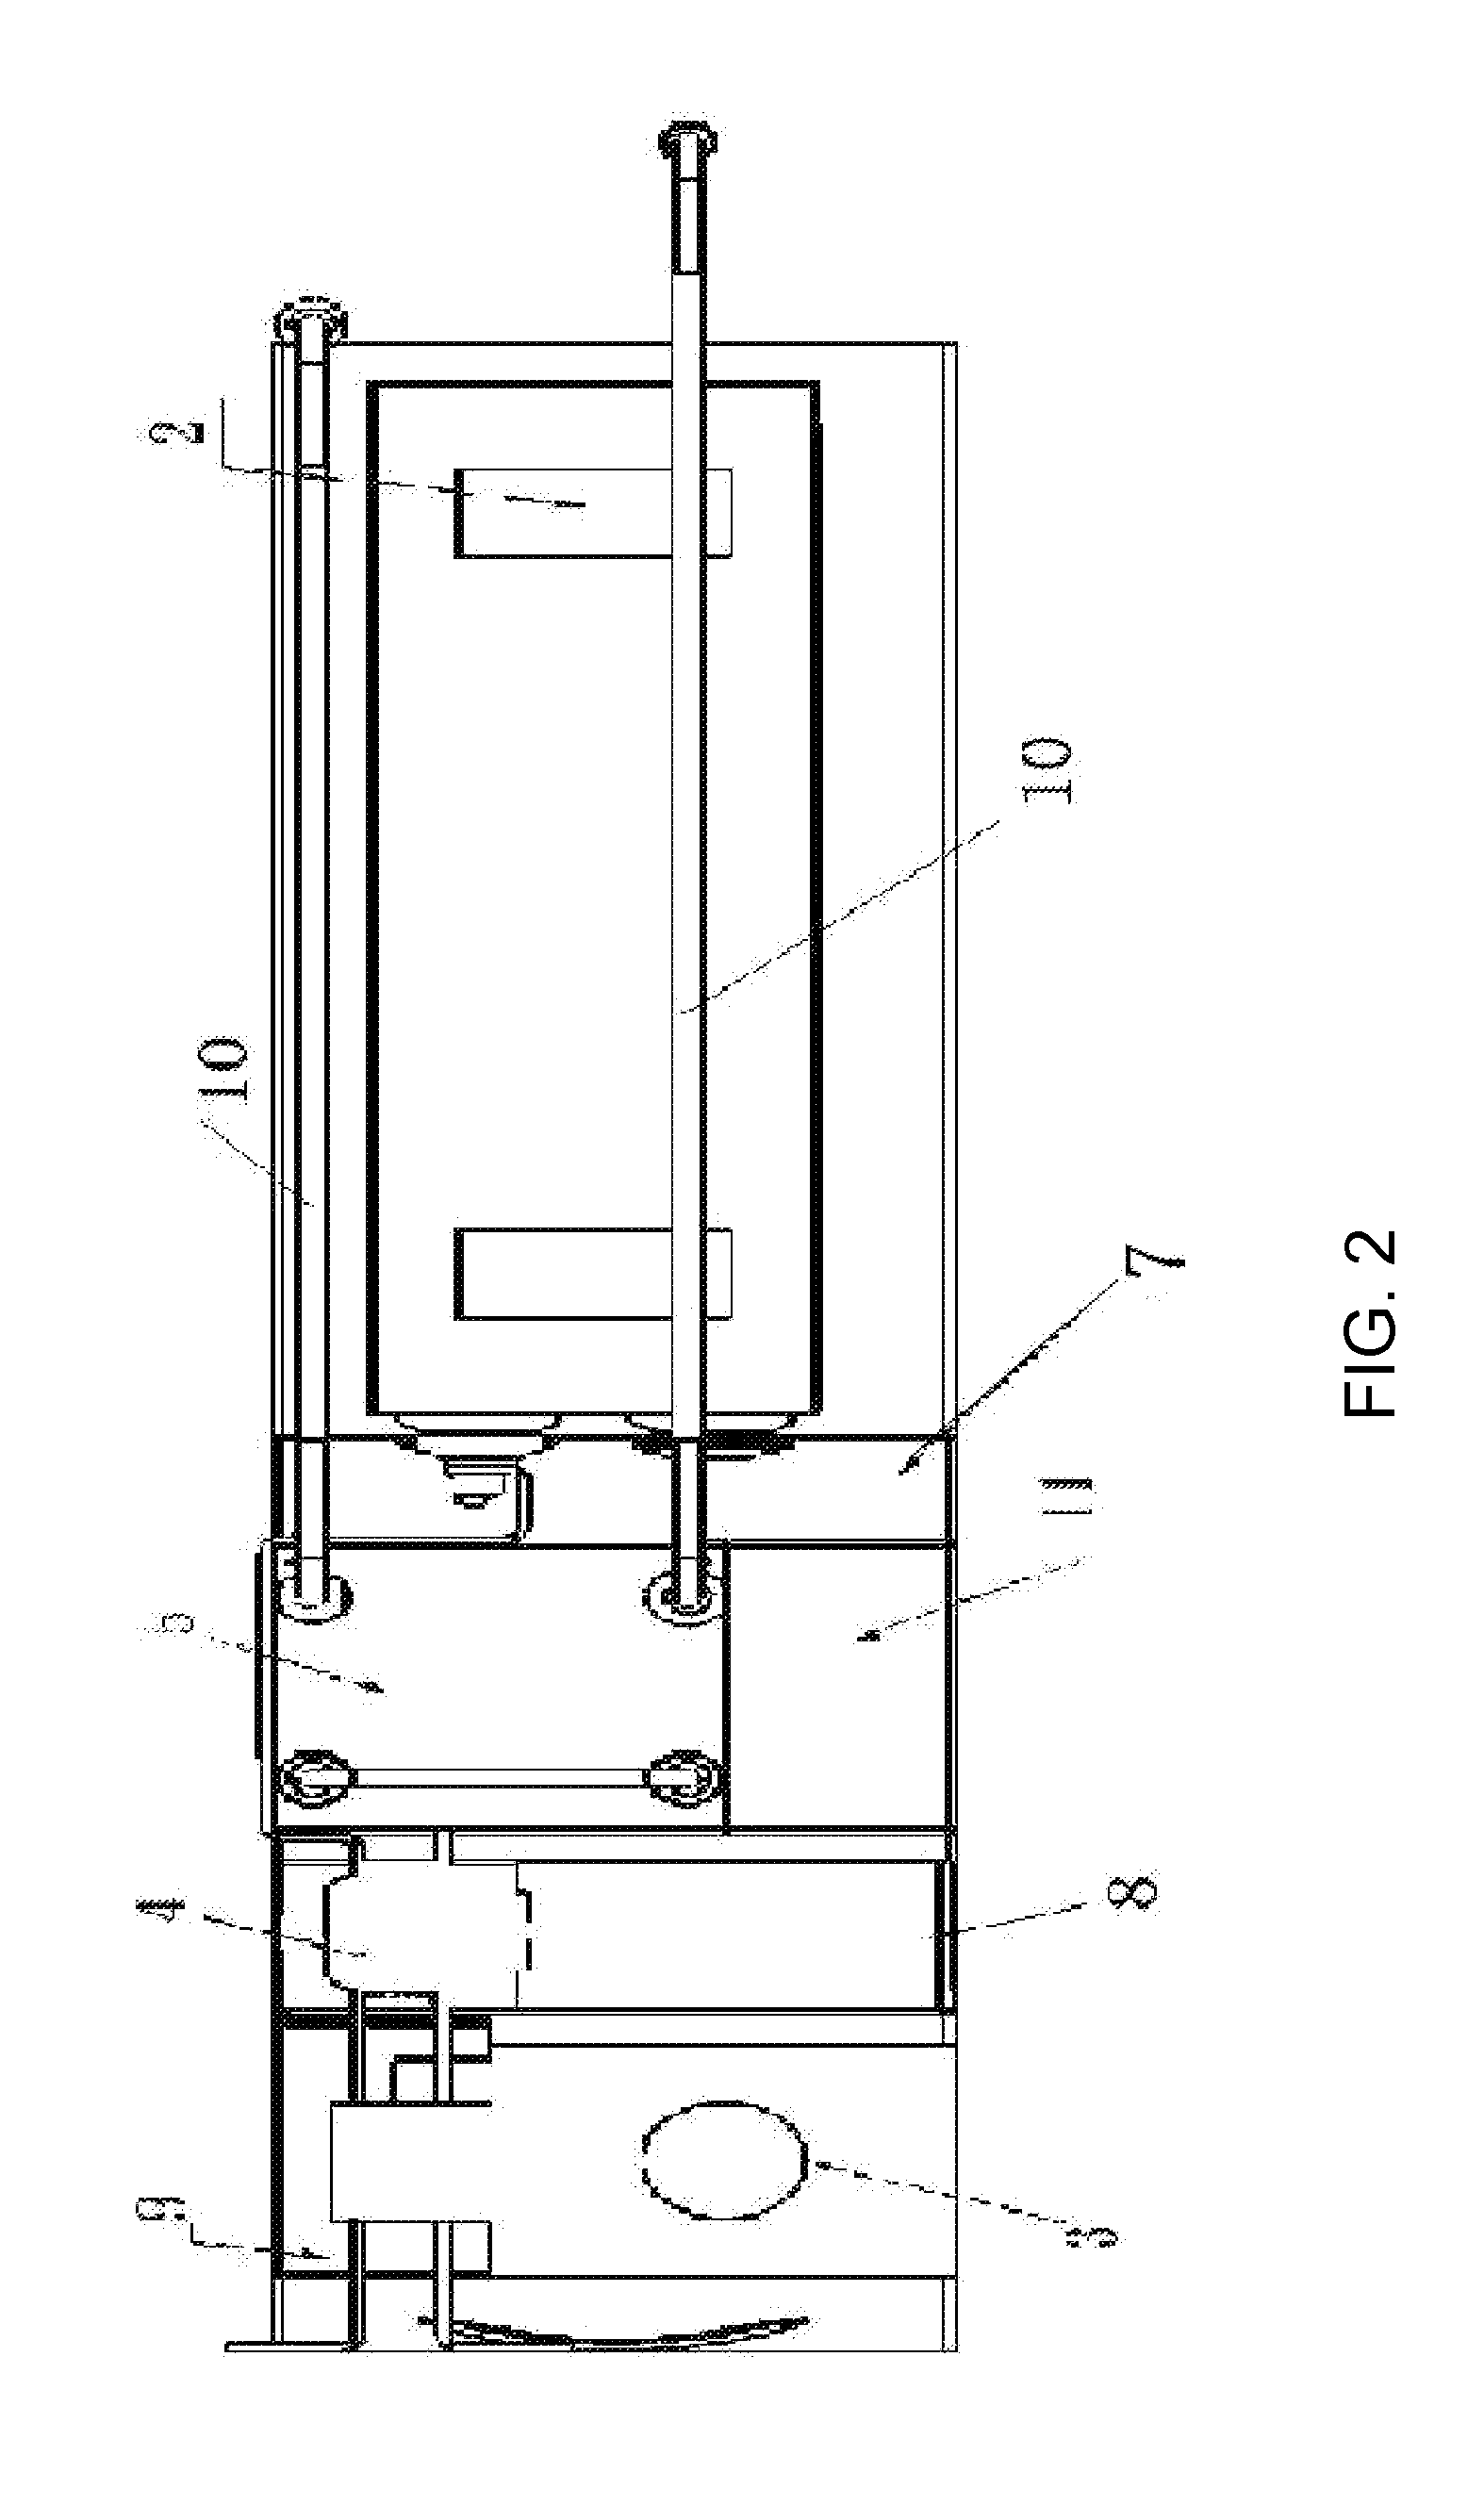 Basic function unit of voltage-source converter based on full-controlled devices